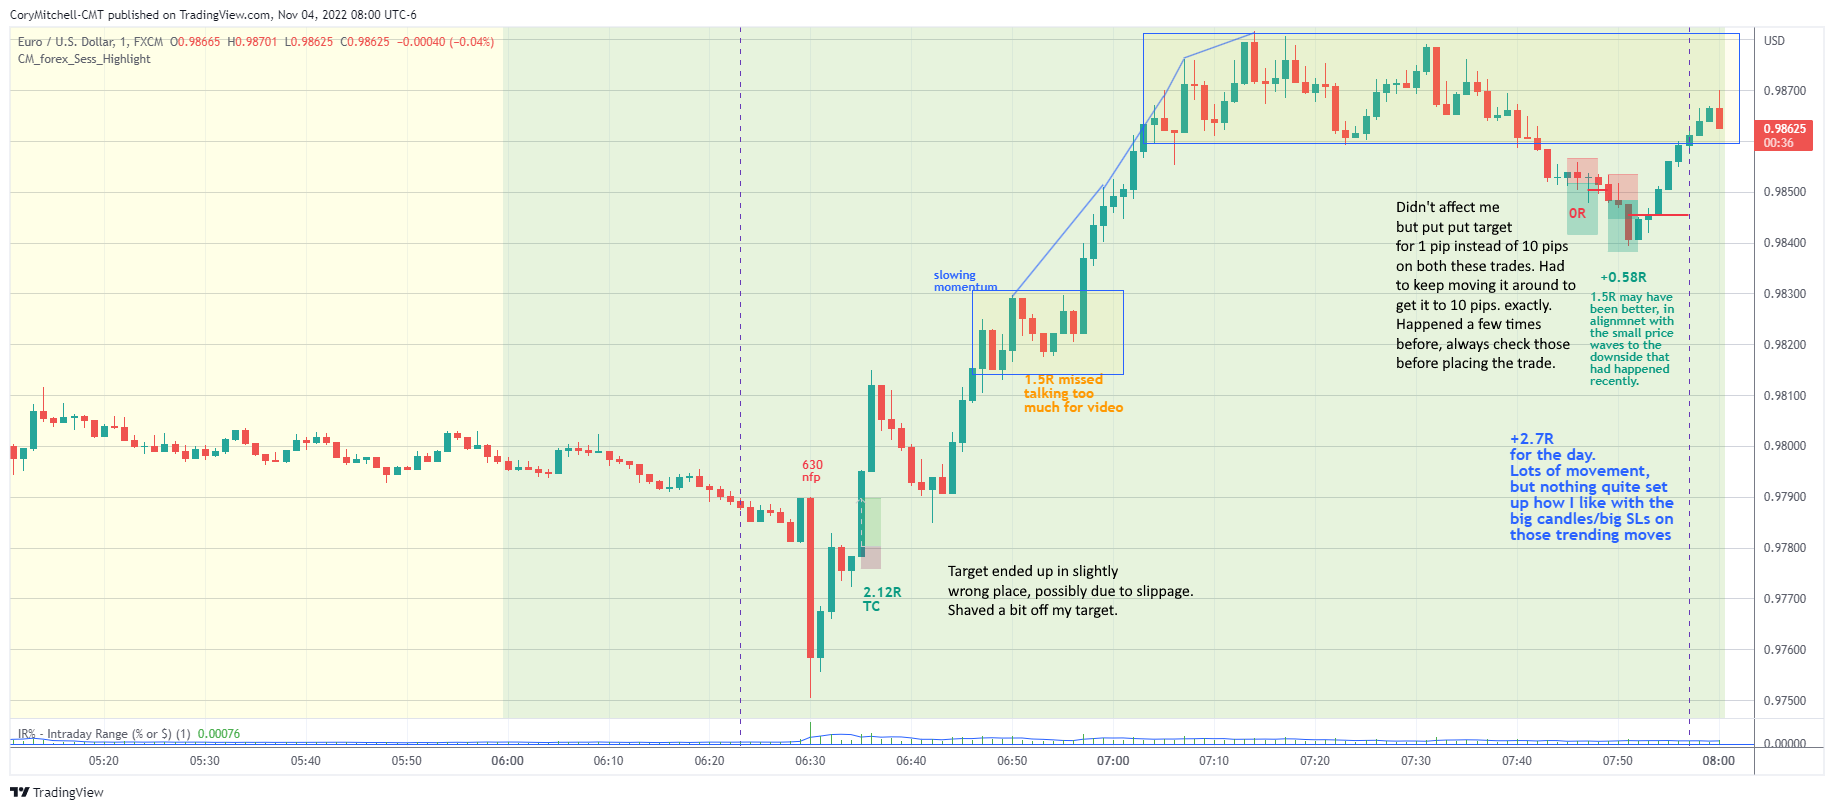 Day trading NFP on EURUSD 1-minute chart Nov. 4 2022